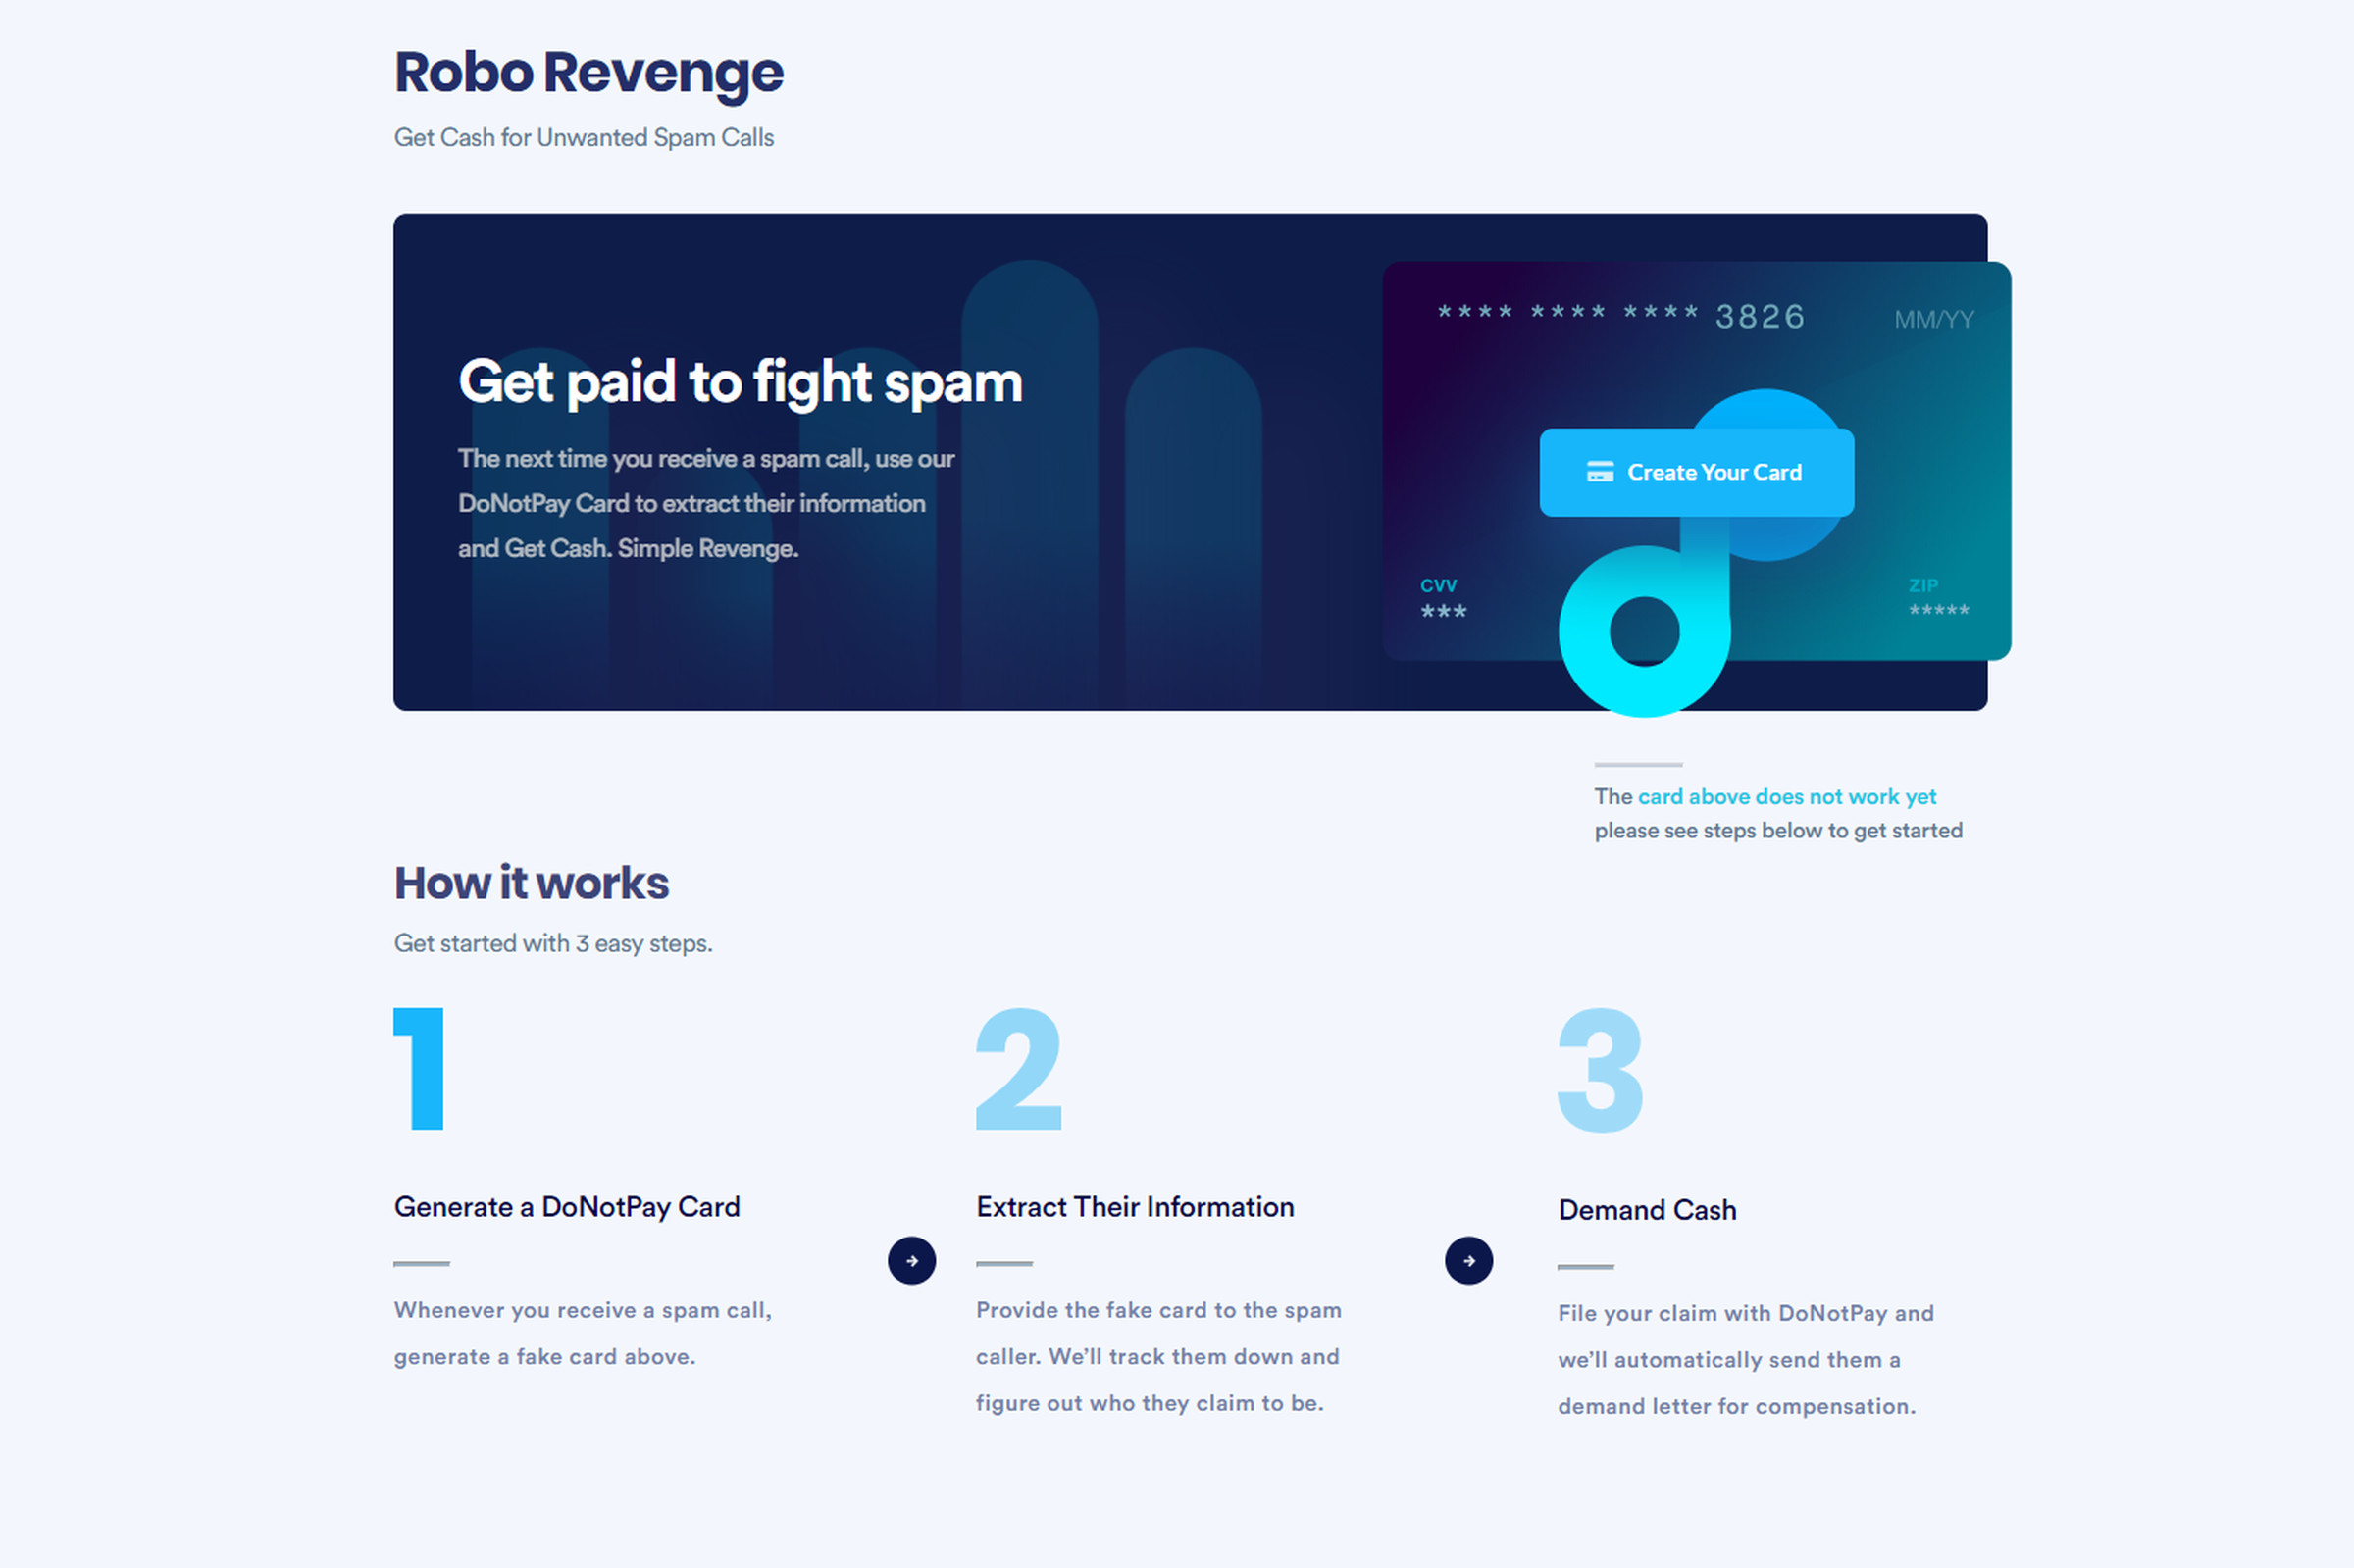 Robo Revenge uses a virtual credit card to let you sue robocallers.